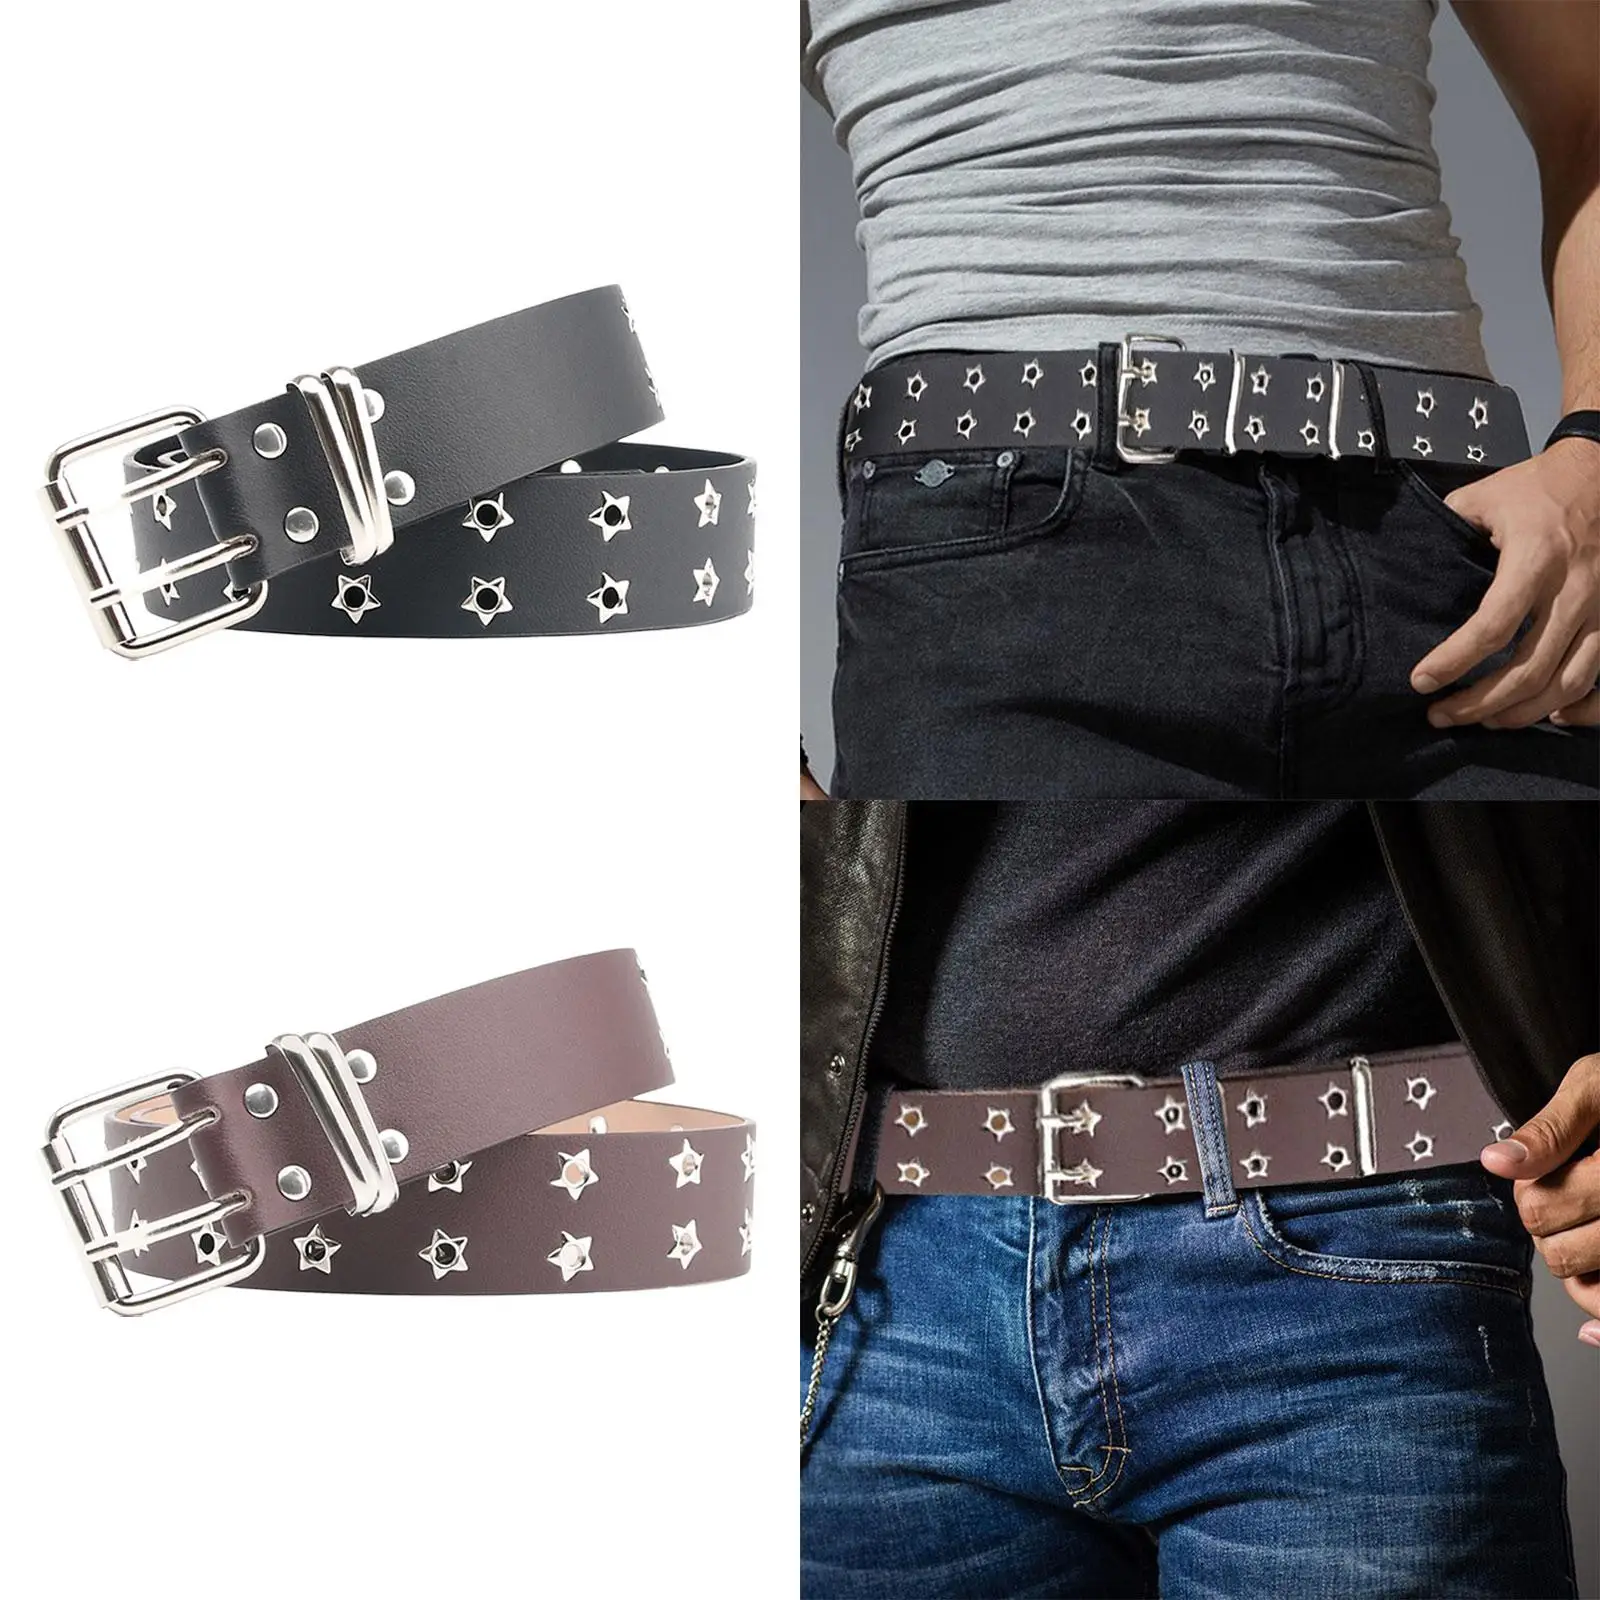 Double Grommet Belt Double Prong Buckle Gothic Adjustable Punk PU Leather with 2 Holes Punk Belt for Club Cosplay Jeans Party